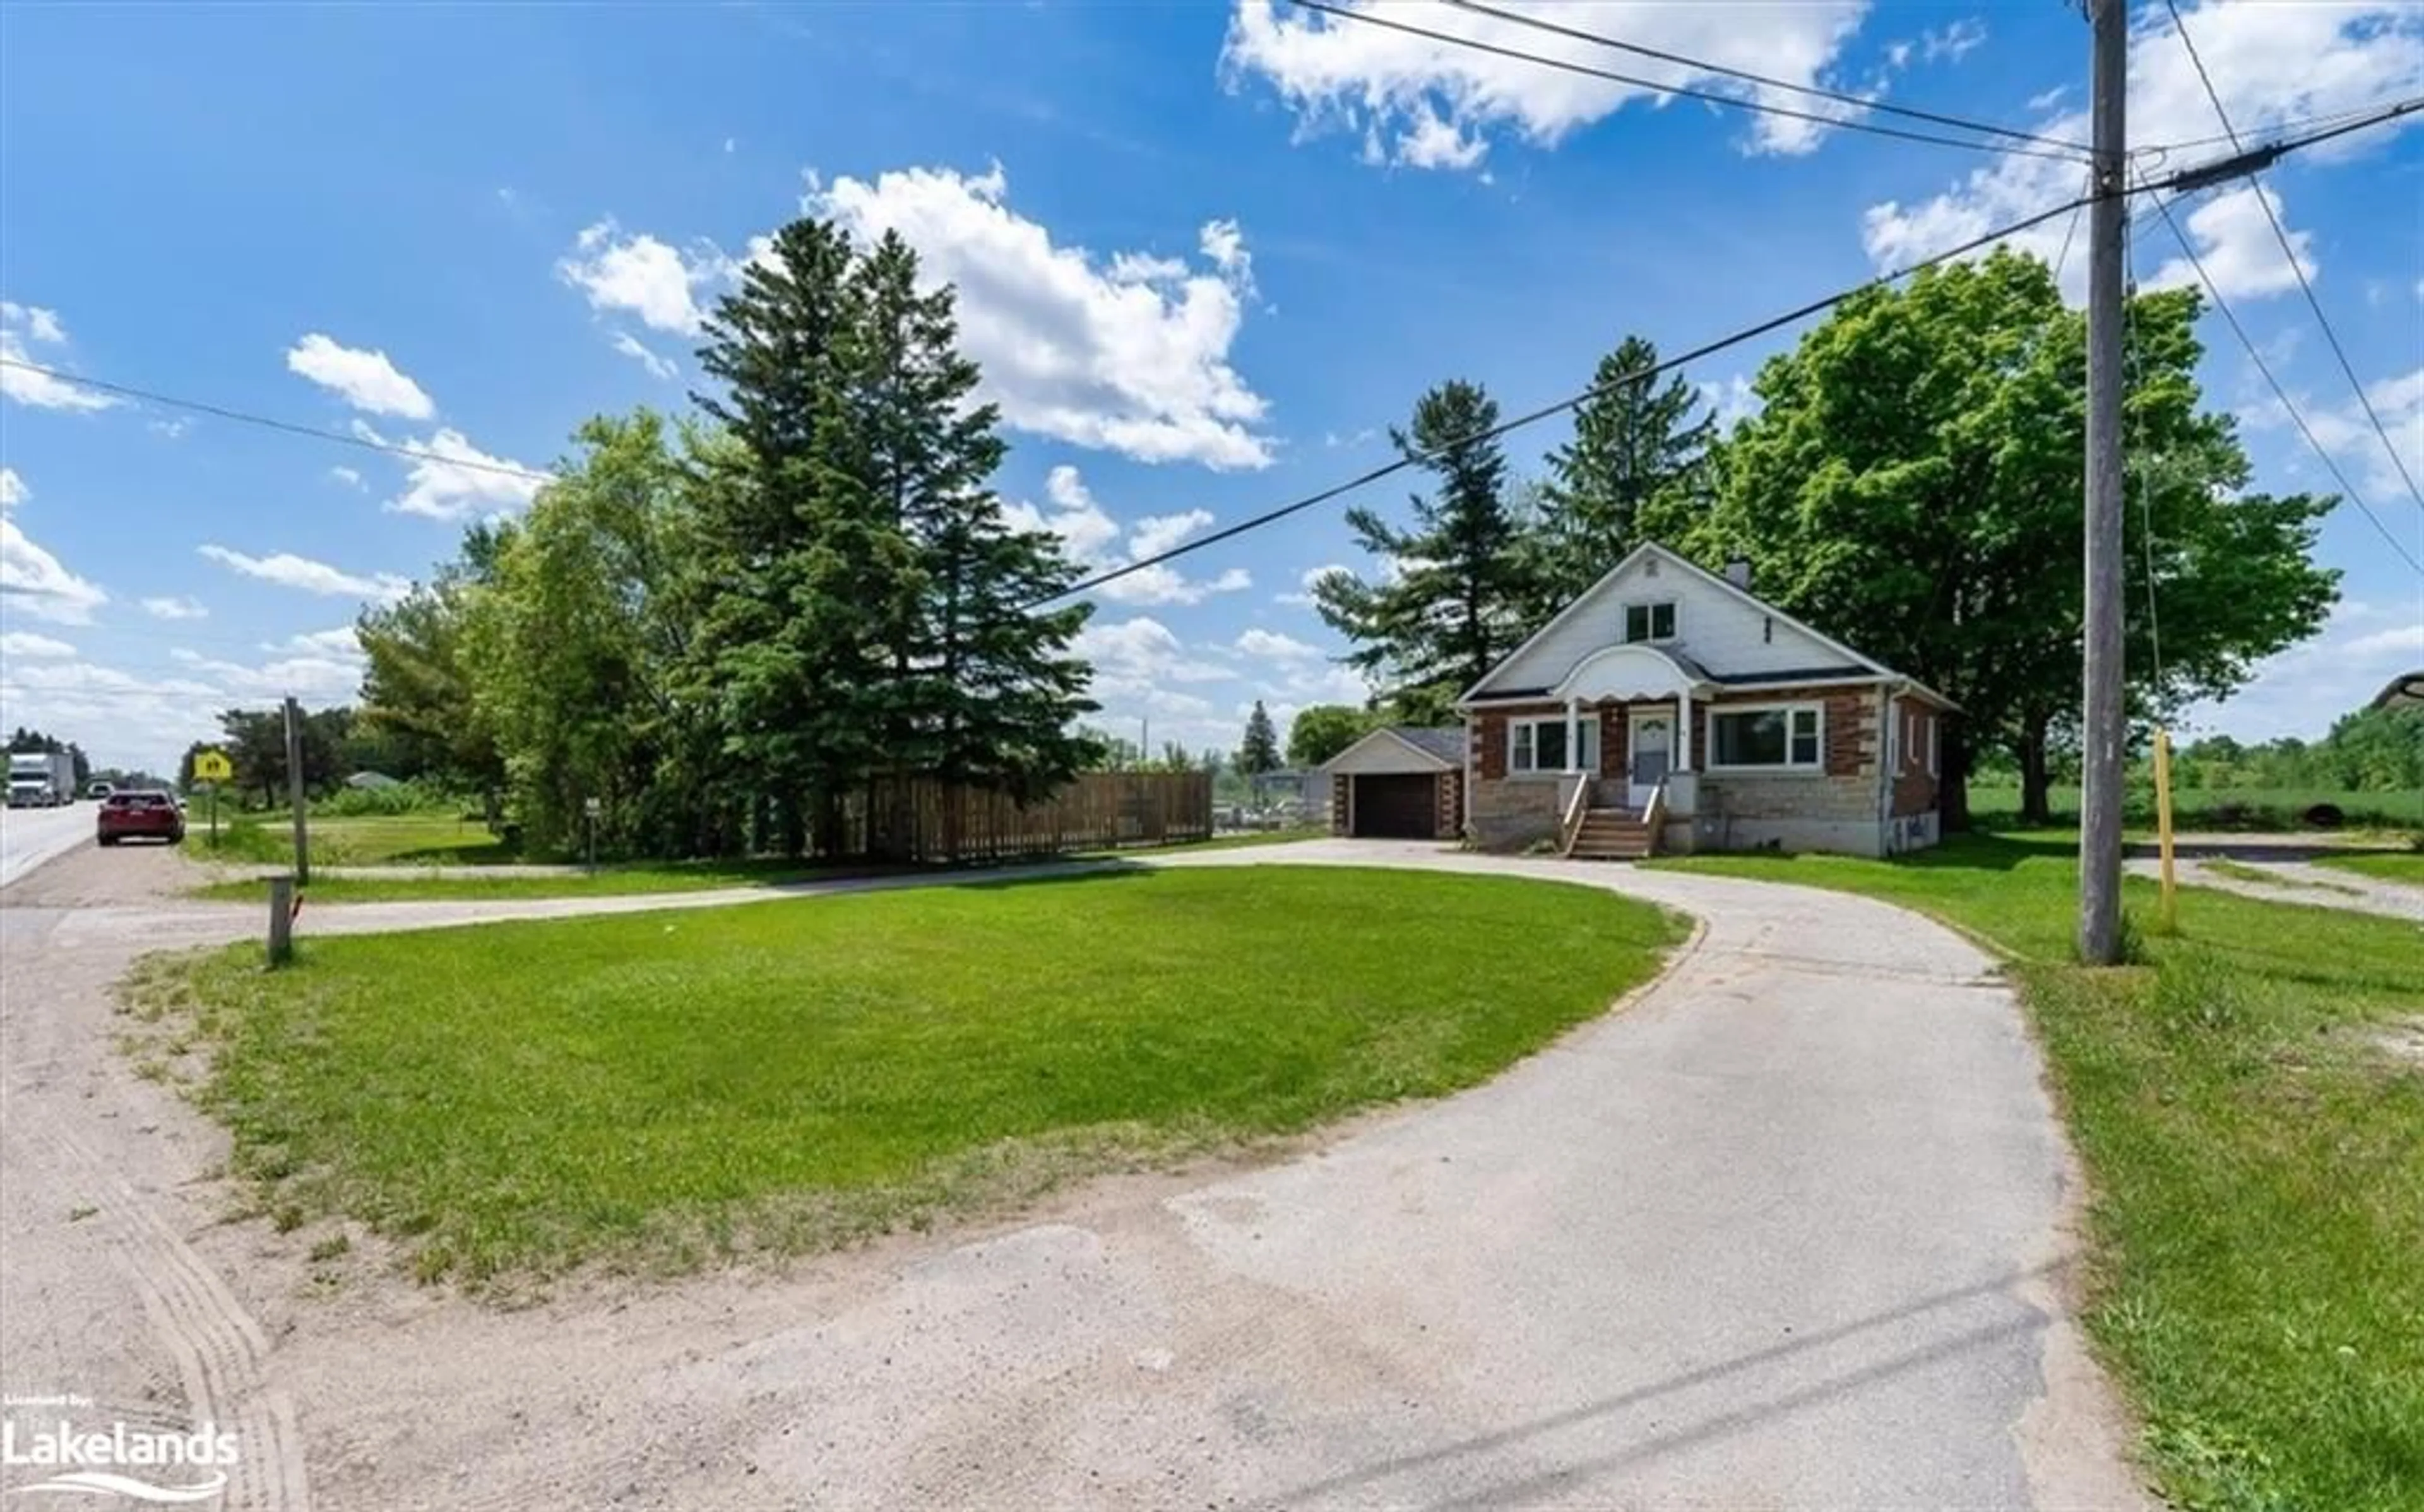 Cottage for 7613 Highway 26, Stayner Ontario L0M 1S0